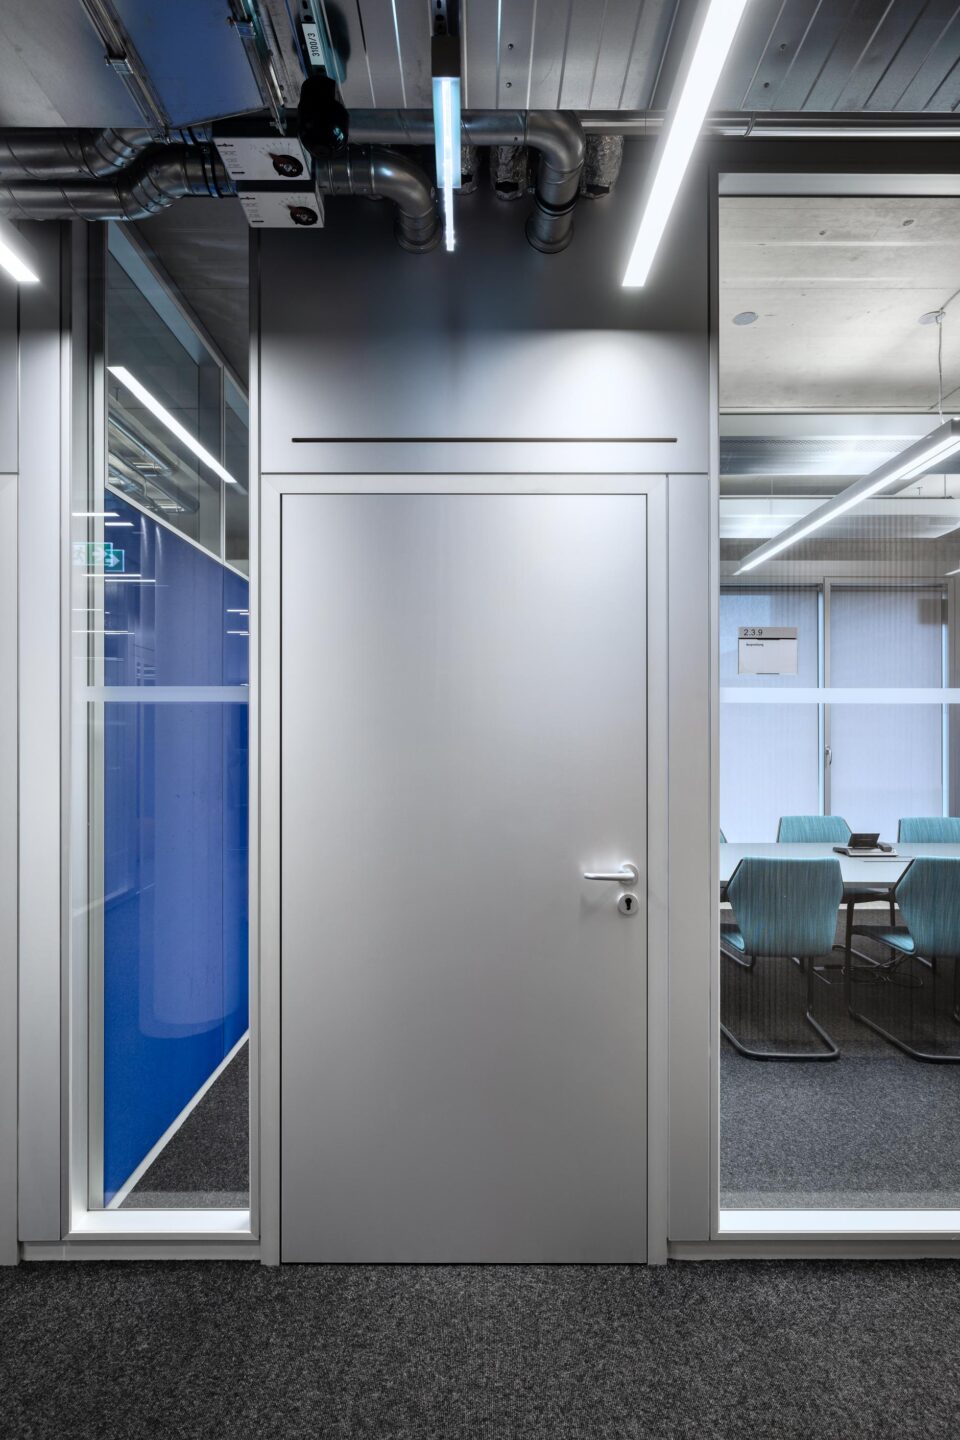 The doors are flush with the corridor as fecotür H70 timber door elements or fecotür A70 aluminium-framed glass doors. Both solutions offer sound insulation class 2, Rw,P = 37 dB.